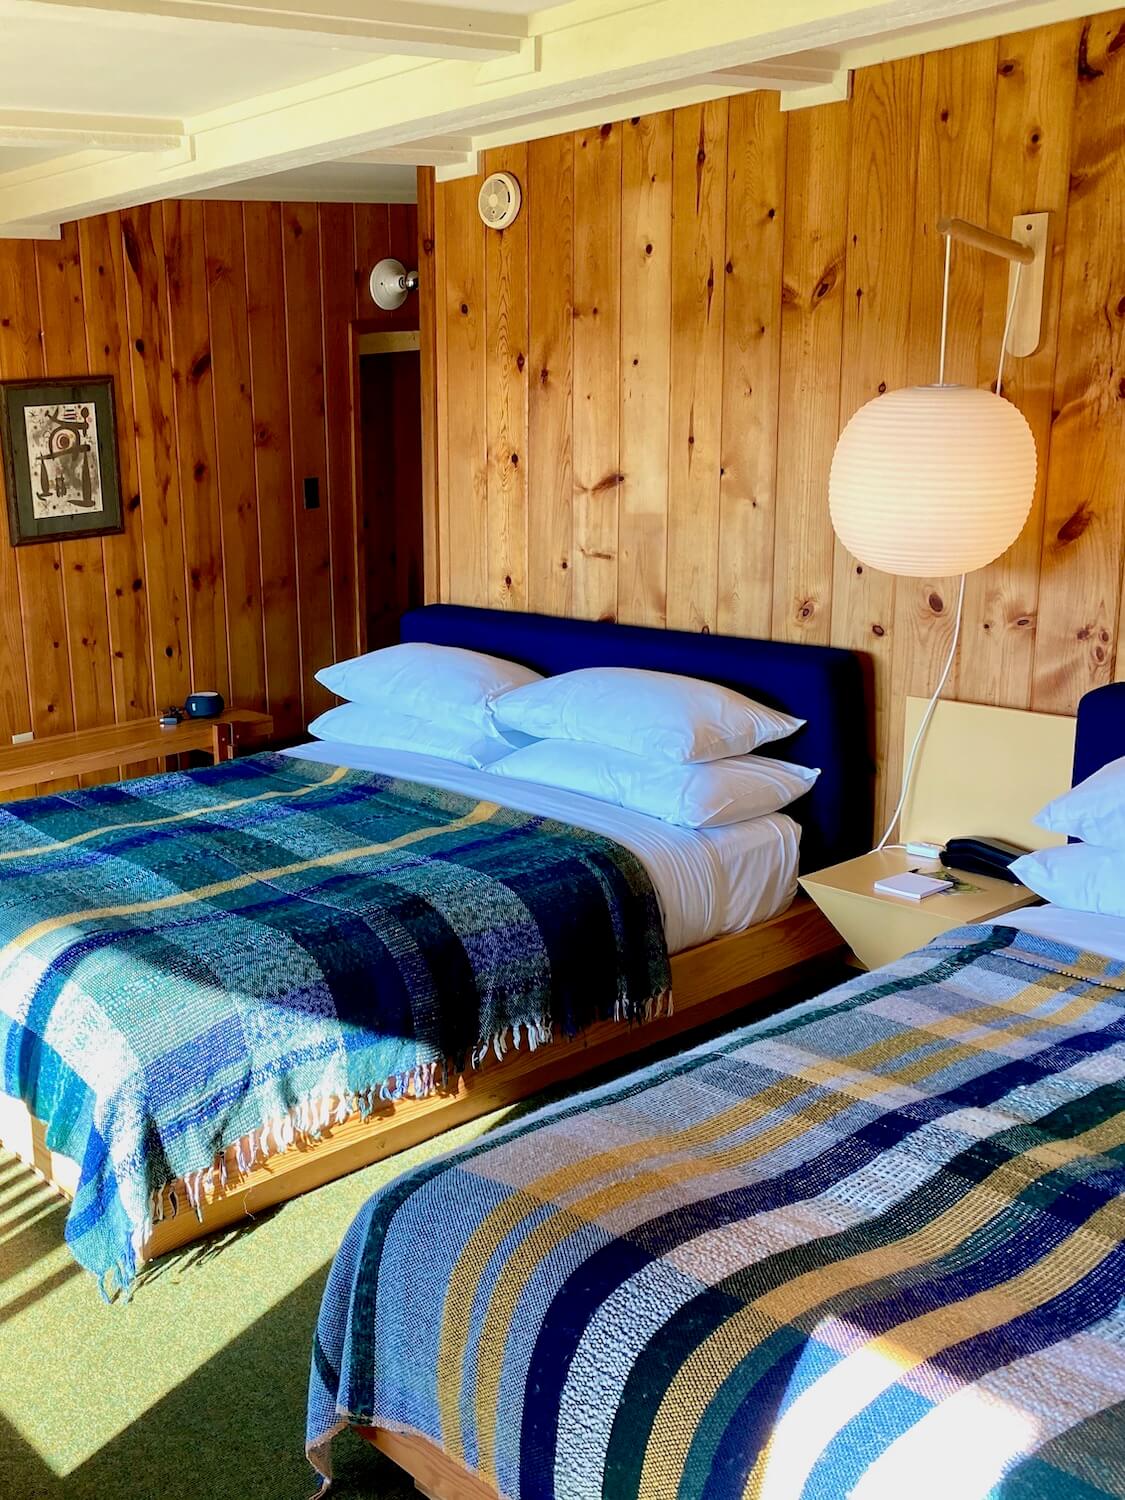 Sunlight fills the room of a Lagoon Area building in the Captain Whidbey lodge complex. There are plaid wool blankets draped over the two queen beds with plush white pillows. The walls are a light pine wood and a large Nelson blue like lamp hangs in between the two beds.